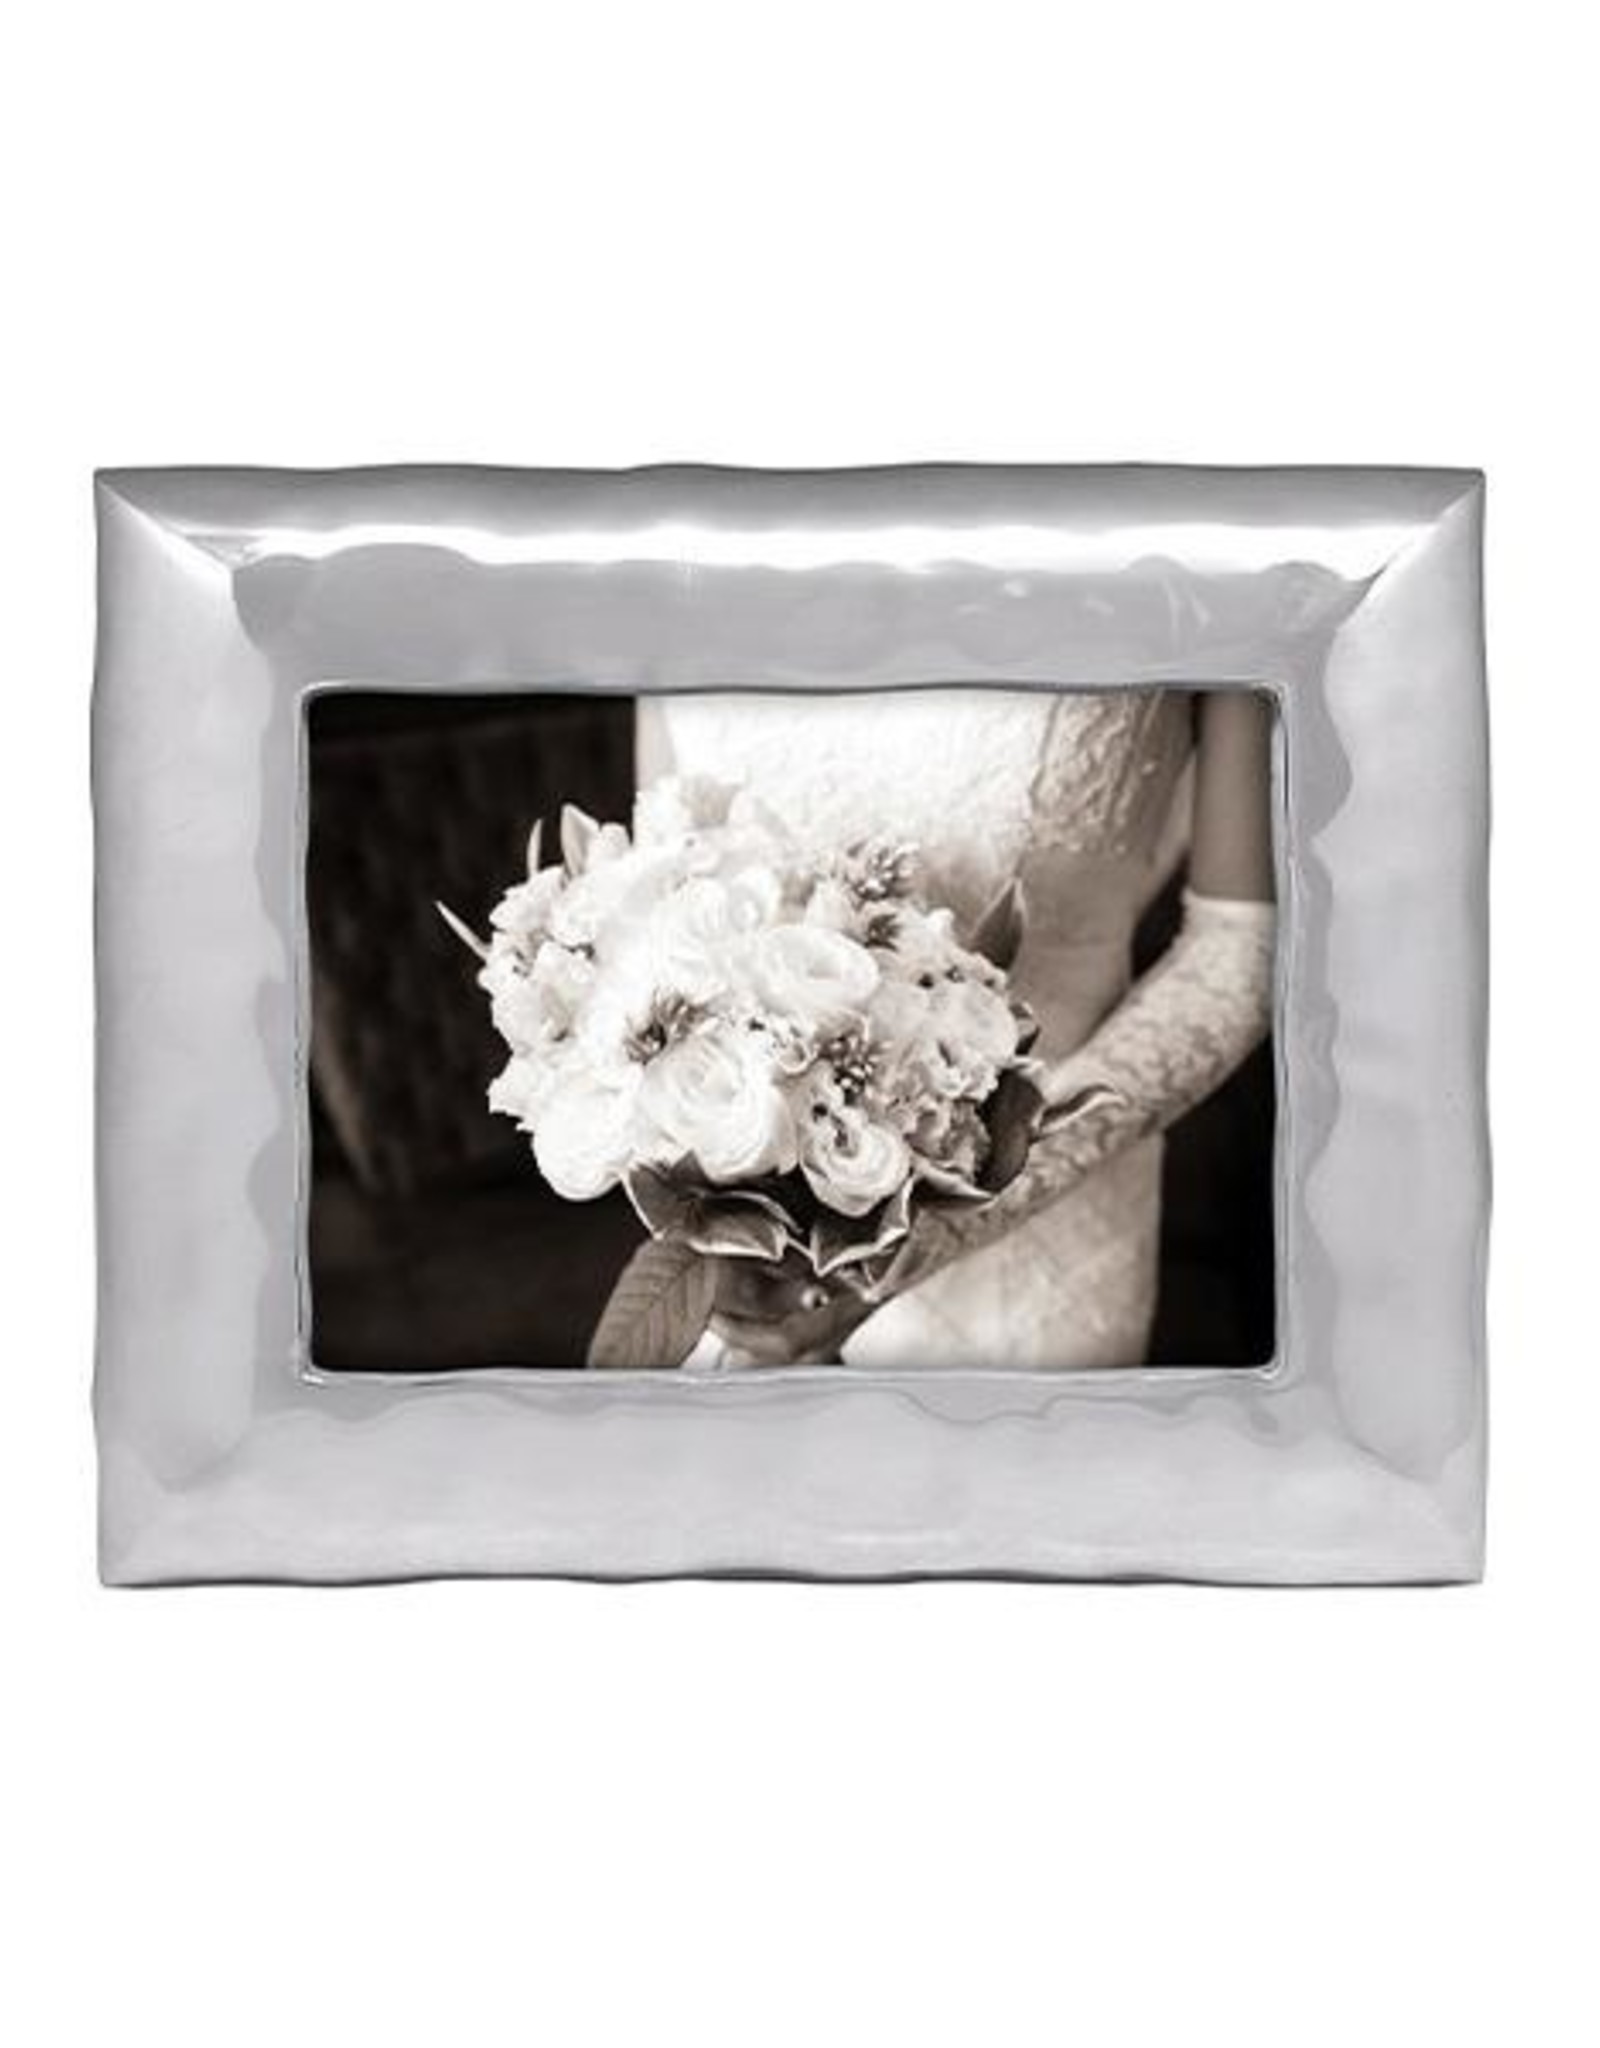 Mariposa Shimmer Picture Frames